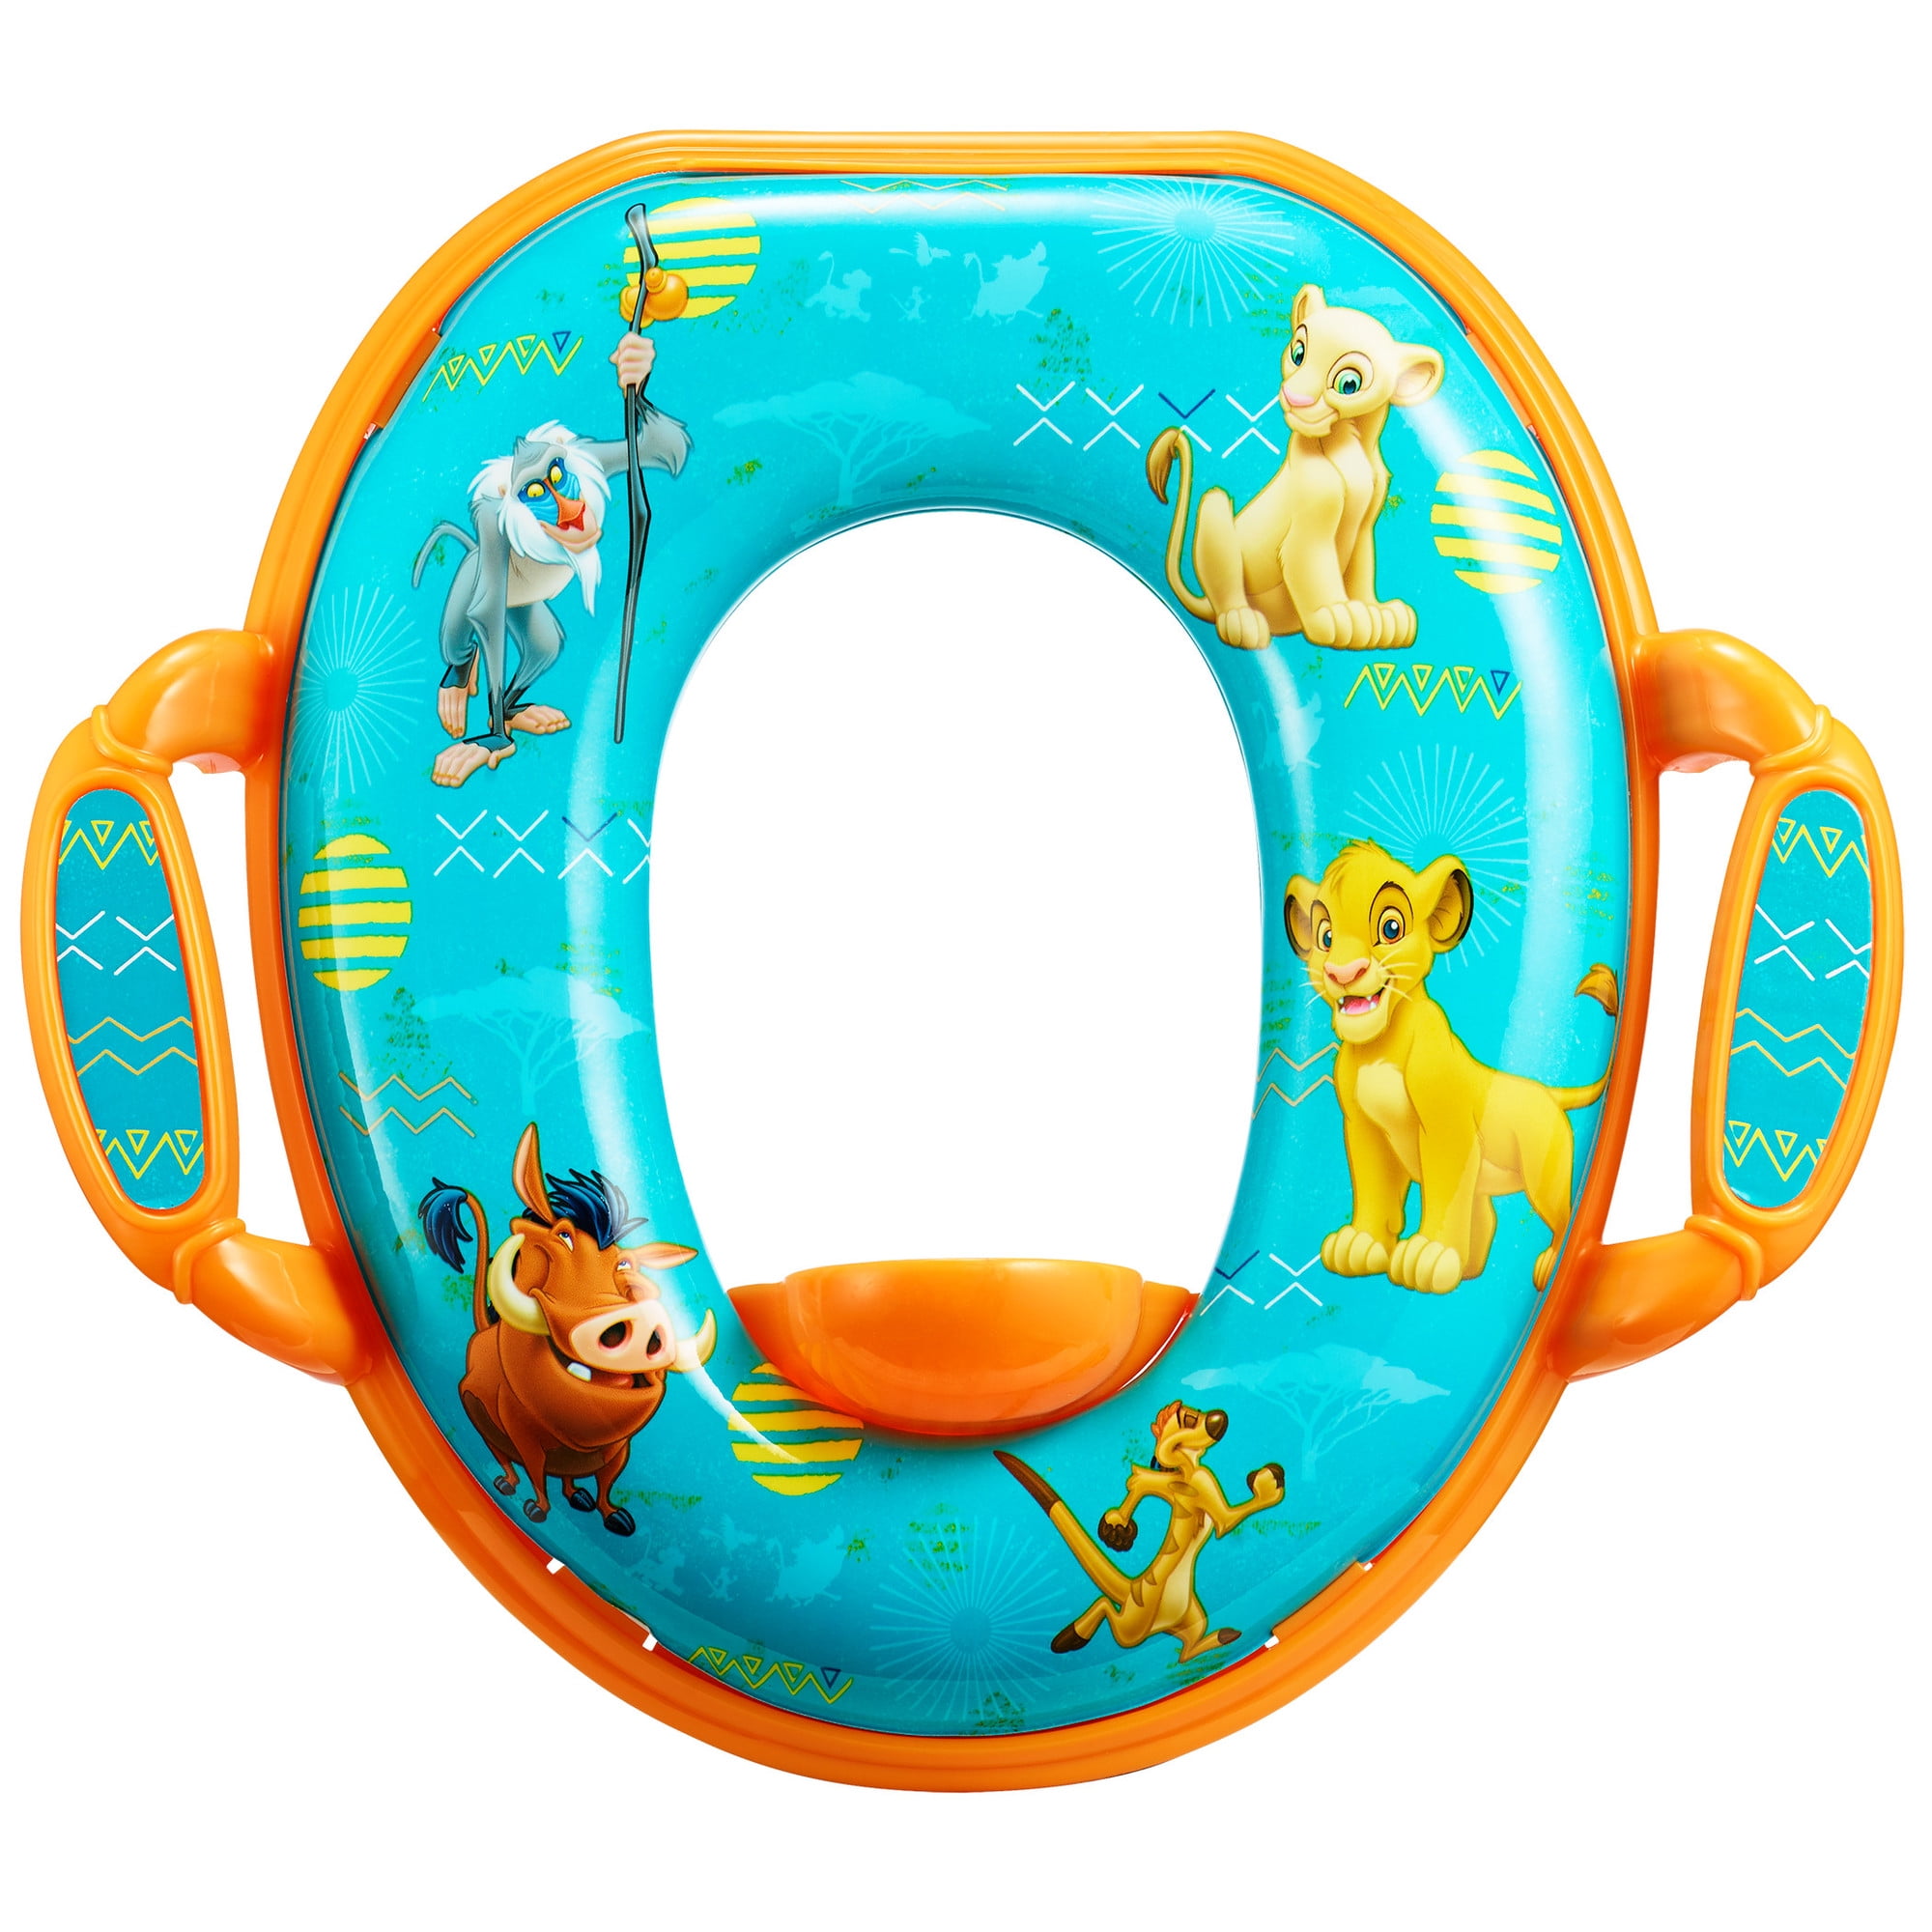 Disney Lion King Kids Toilet Training Seat And Non Slip Step Stool for Toddlers 